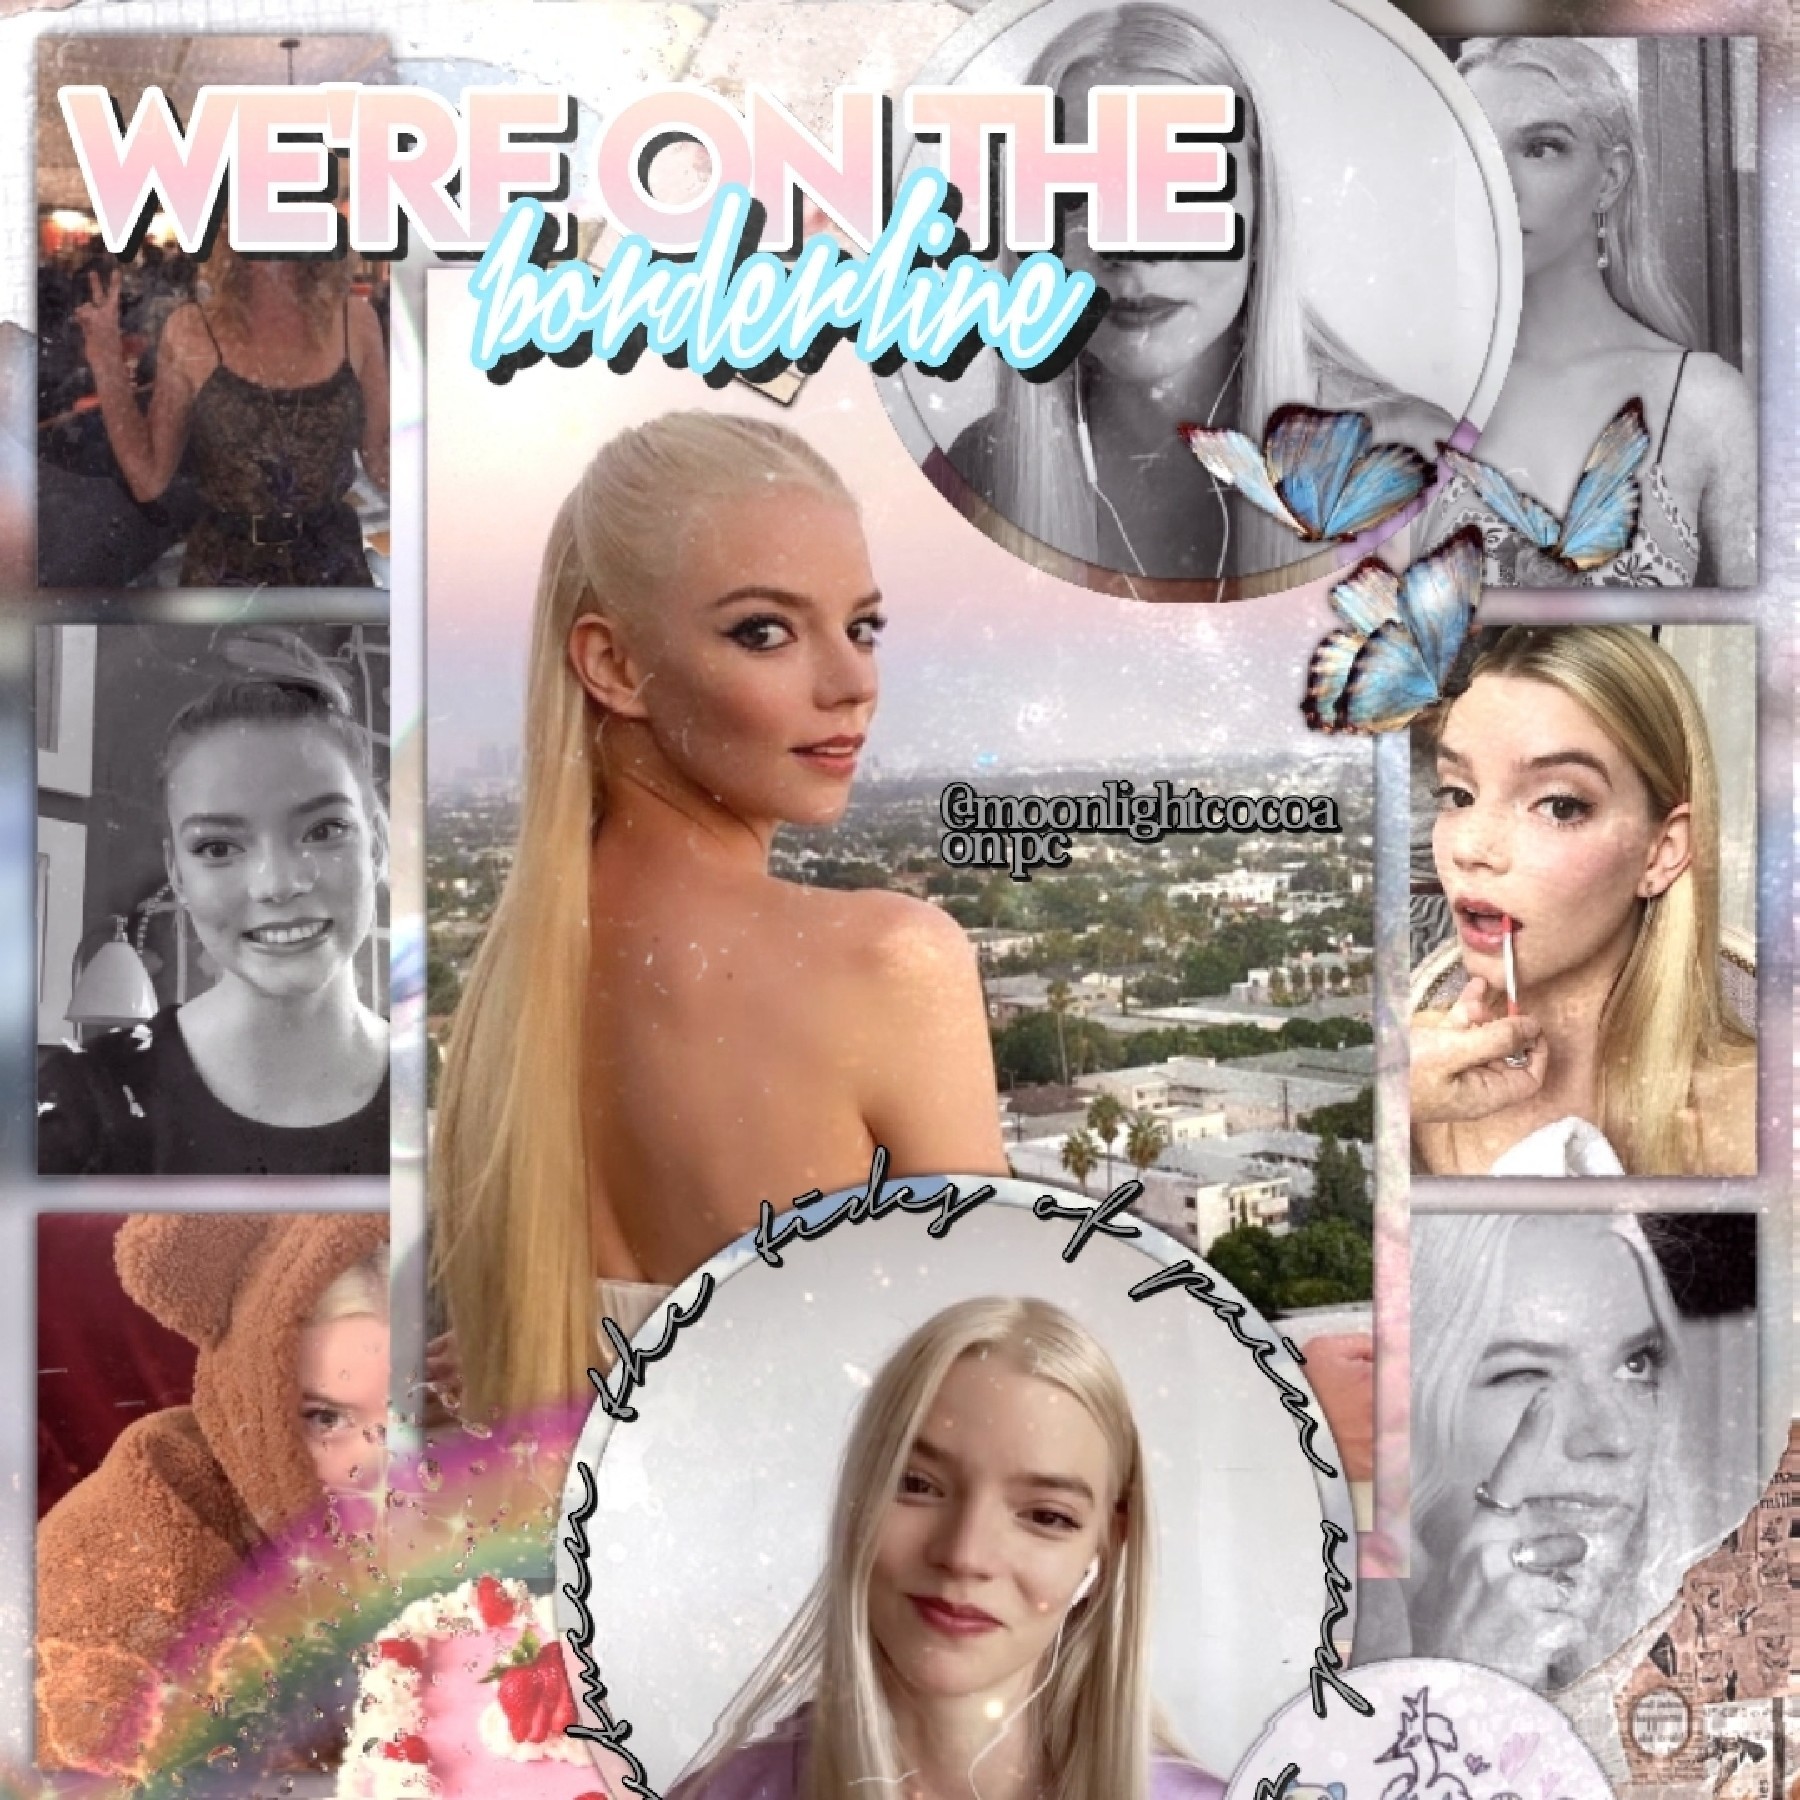 tap🍥
heyy everyone!🌟 here is an Anya Taylor-Joy collage✨💗 thx @-bearii-sugarcombcs for the suggestion!💖  i'm so obsessed with her, she's gorgeous and an amazing actress😍 qotd: fav song at the moment? aotd: lovers rock❤️